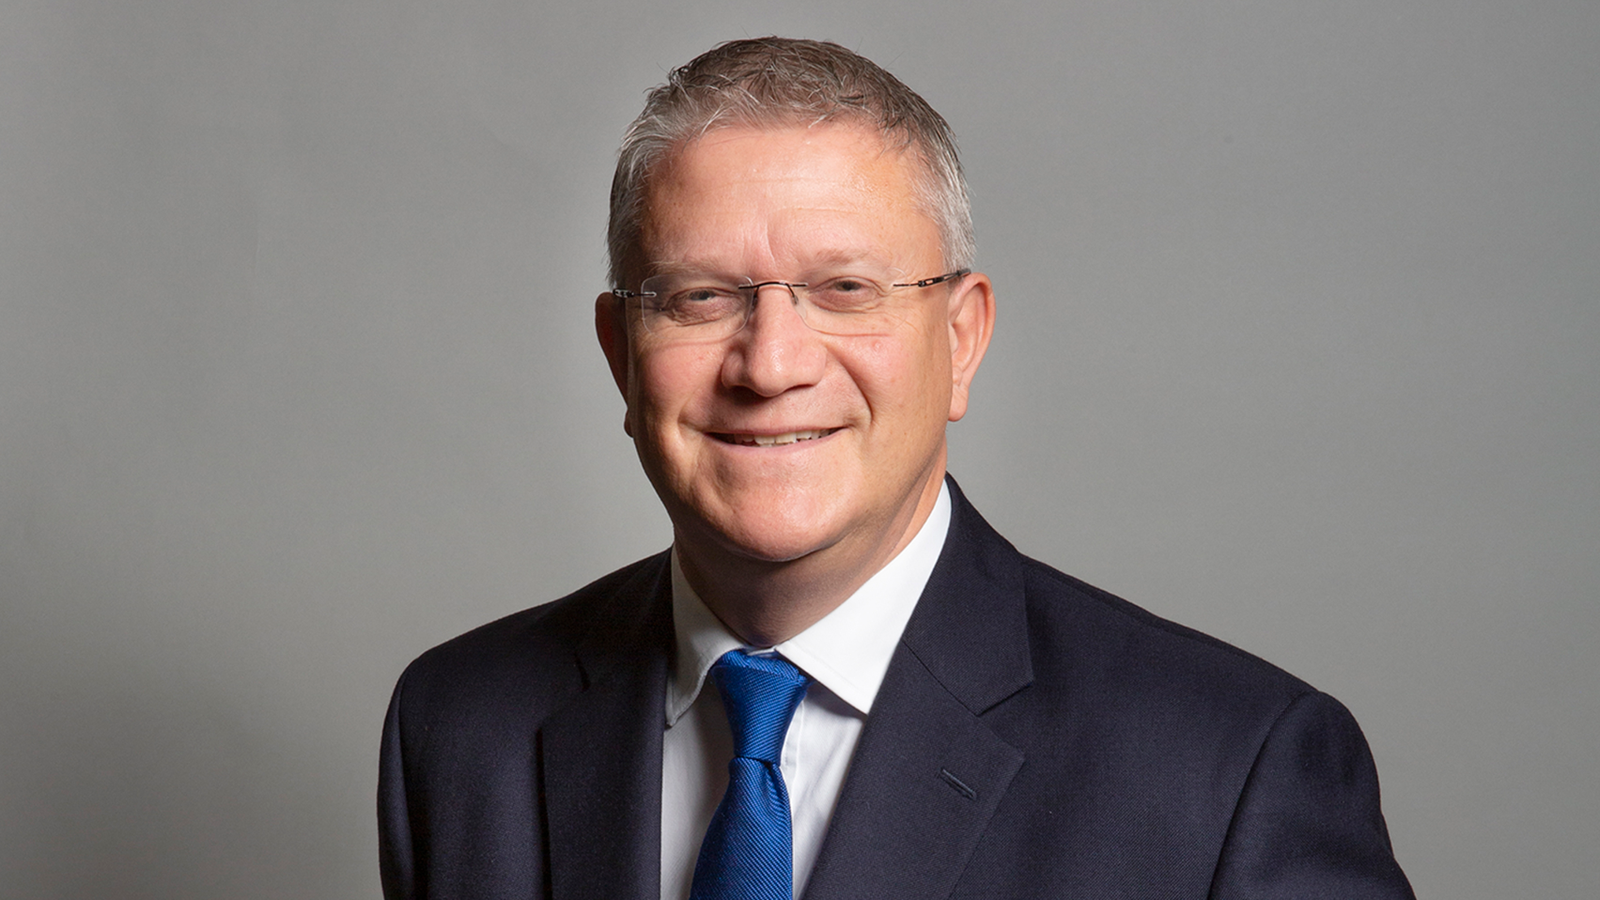 Police drop rape investigation into Tory MP Andrew Rosindell